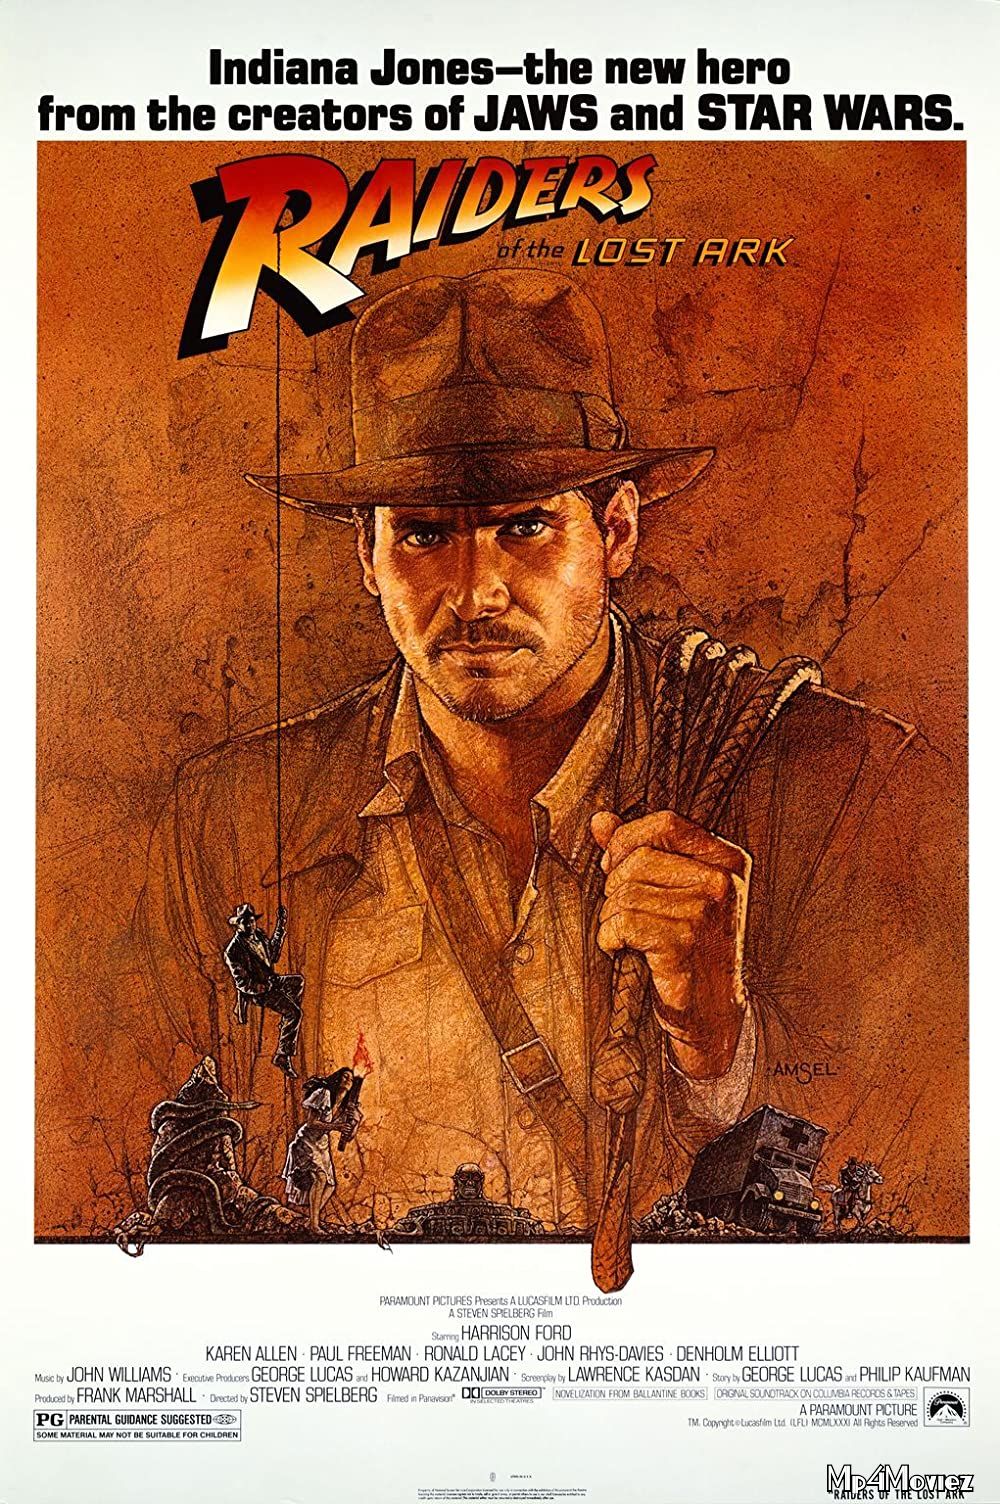 Indiana Jones And The Raiders Of The Lost Ark (1981) Hindi Dubbed BluRay download full movie